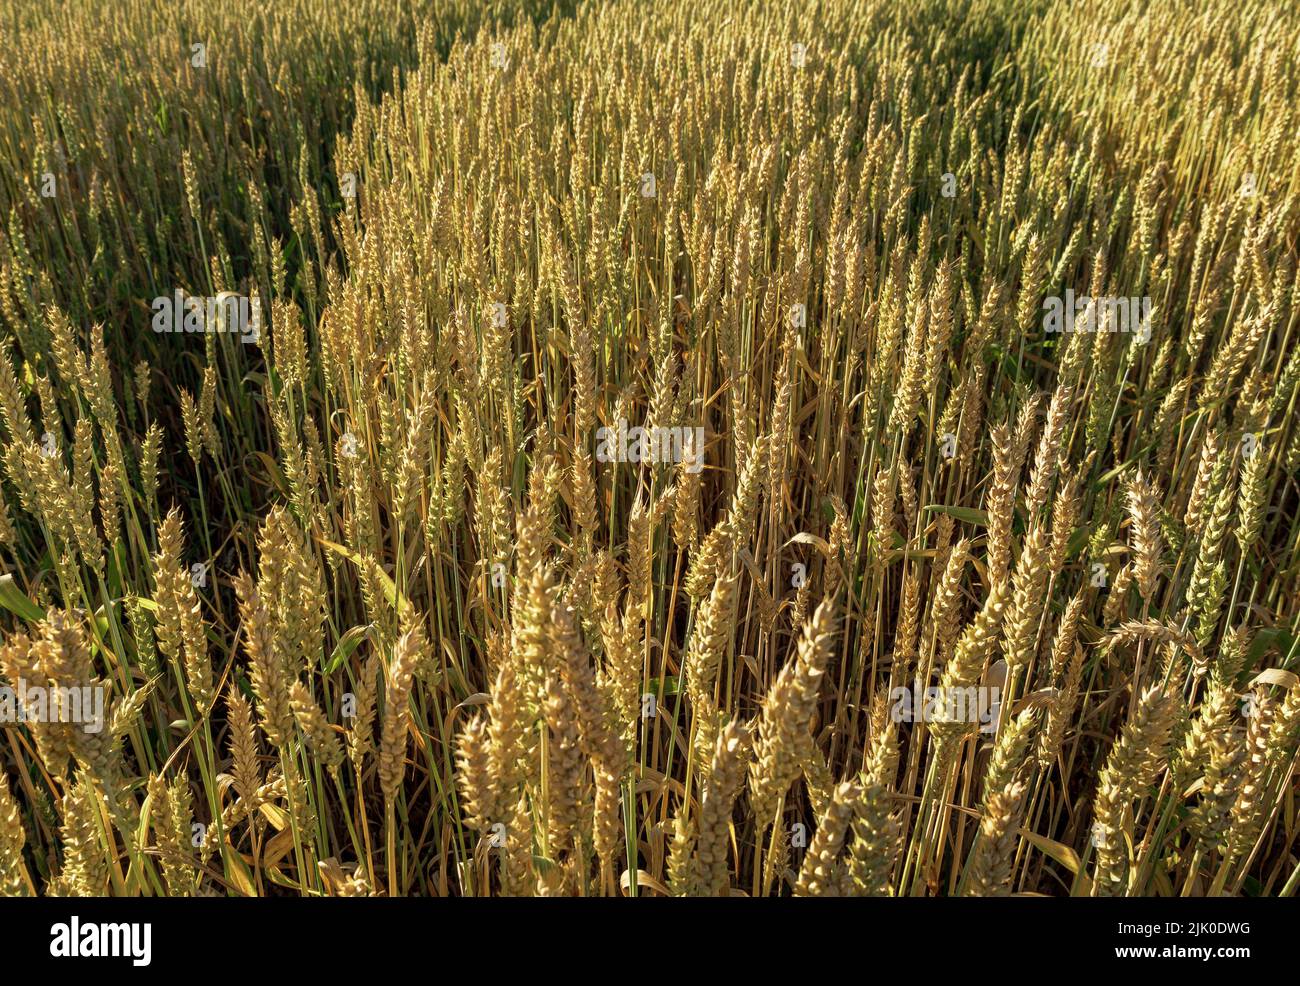 Wheat field in the evening light, Bavaria, Germany, Europe Stock Photo